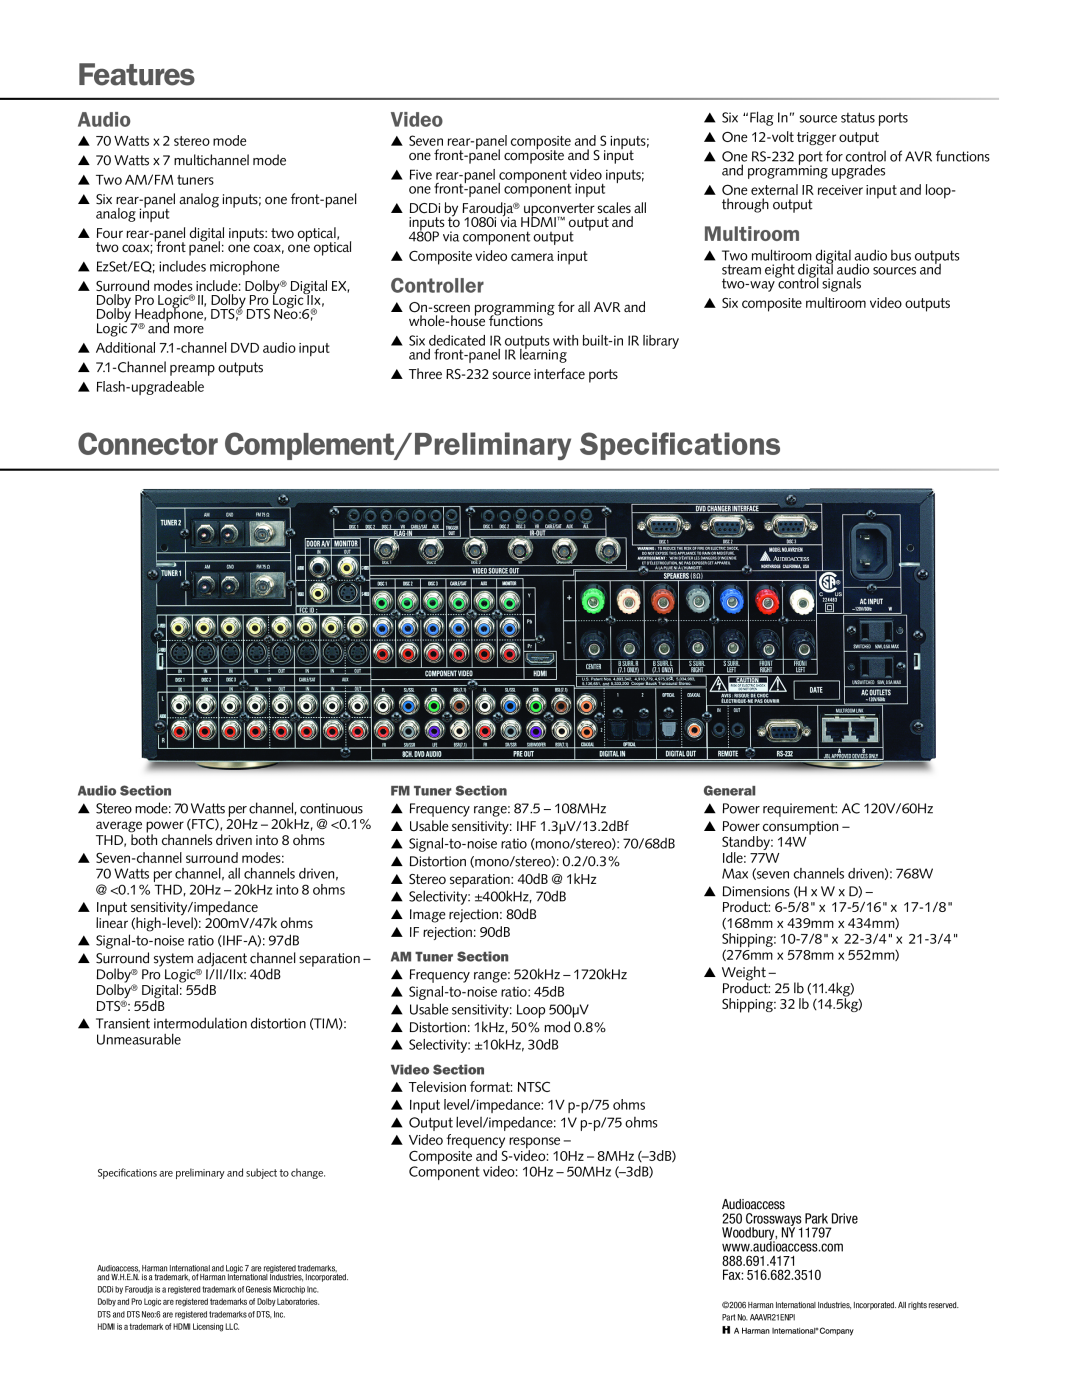 Audioaccess AVR21EN manual Features, Connector Complement/Preliminary Specifications, Audio, Video, Controller, Multiroom 